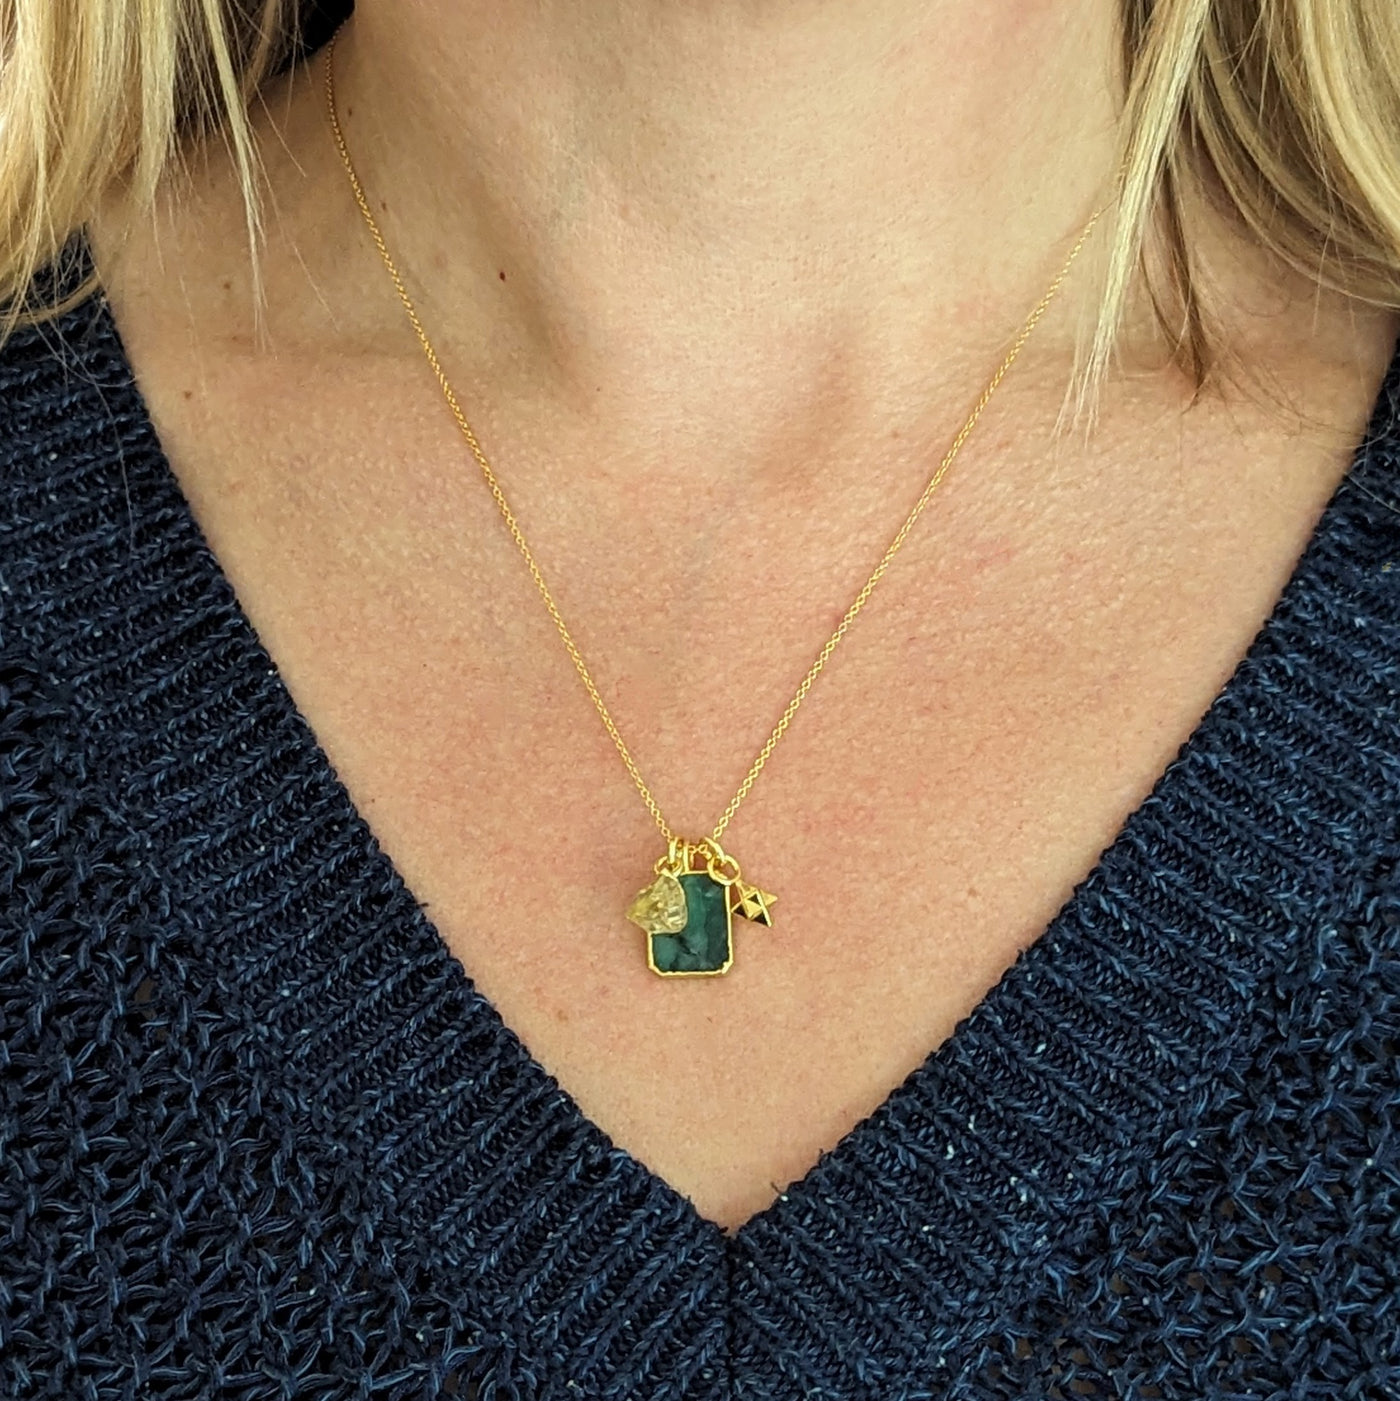 The Trio Emerald, Citrine and Charm Gemstone Necklace